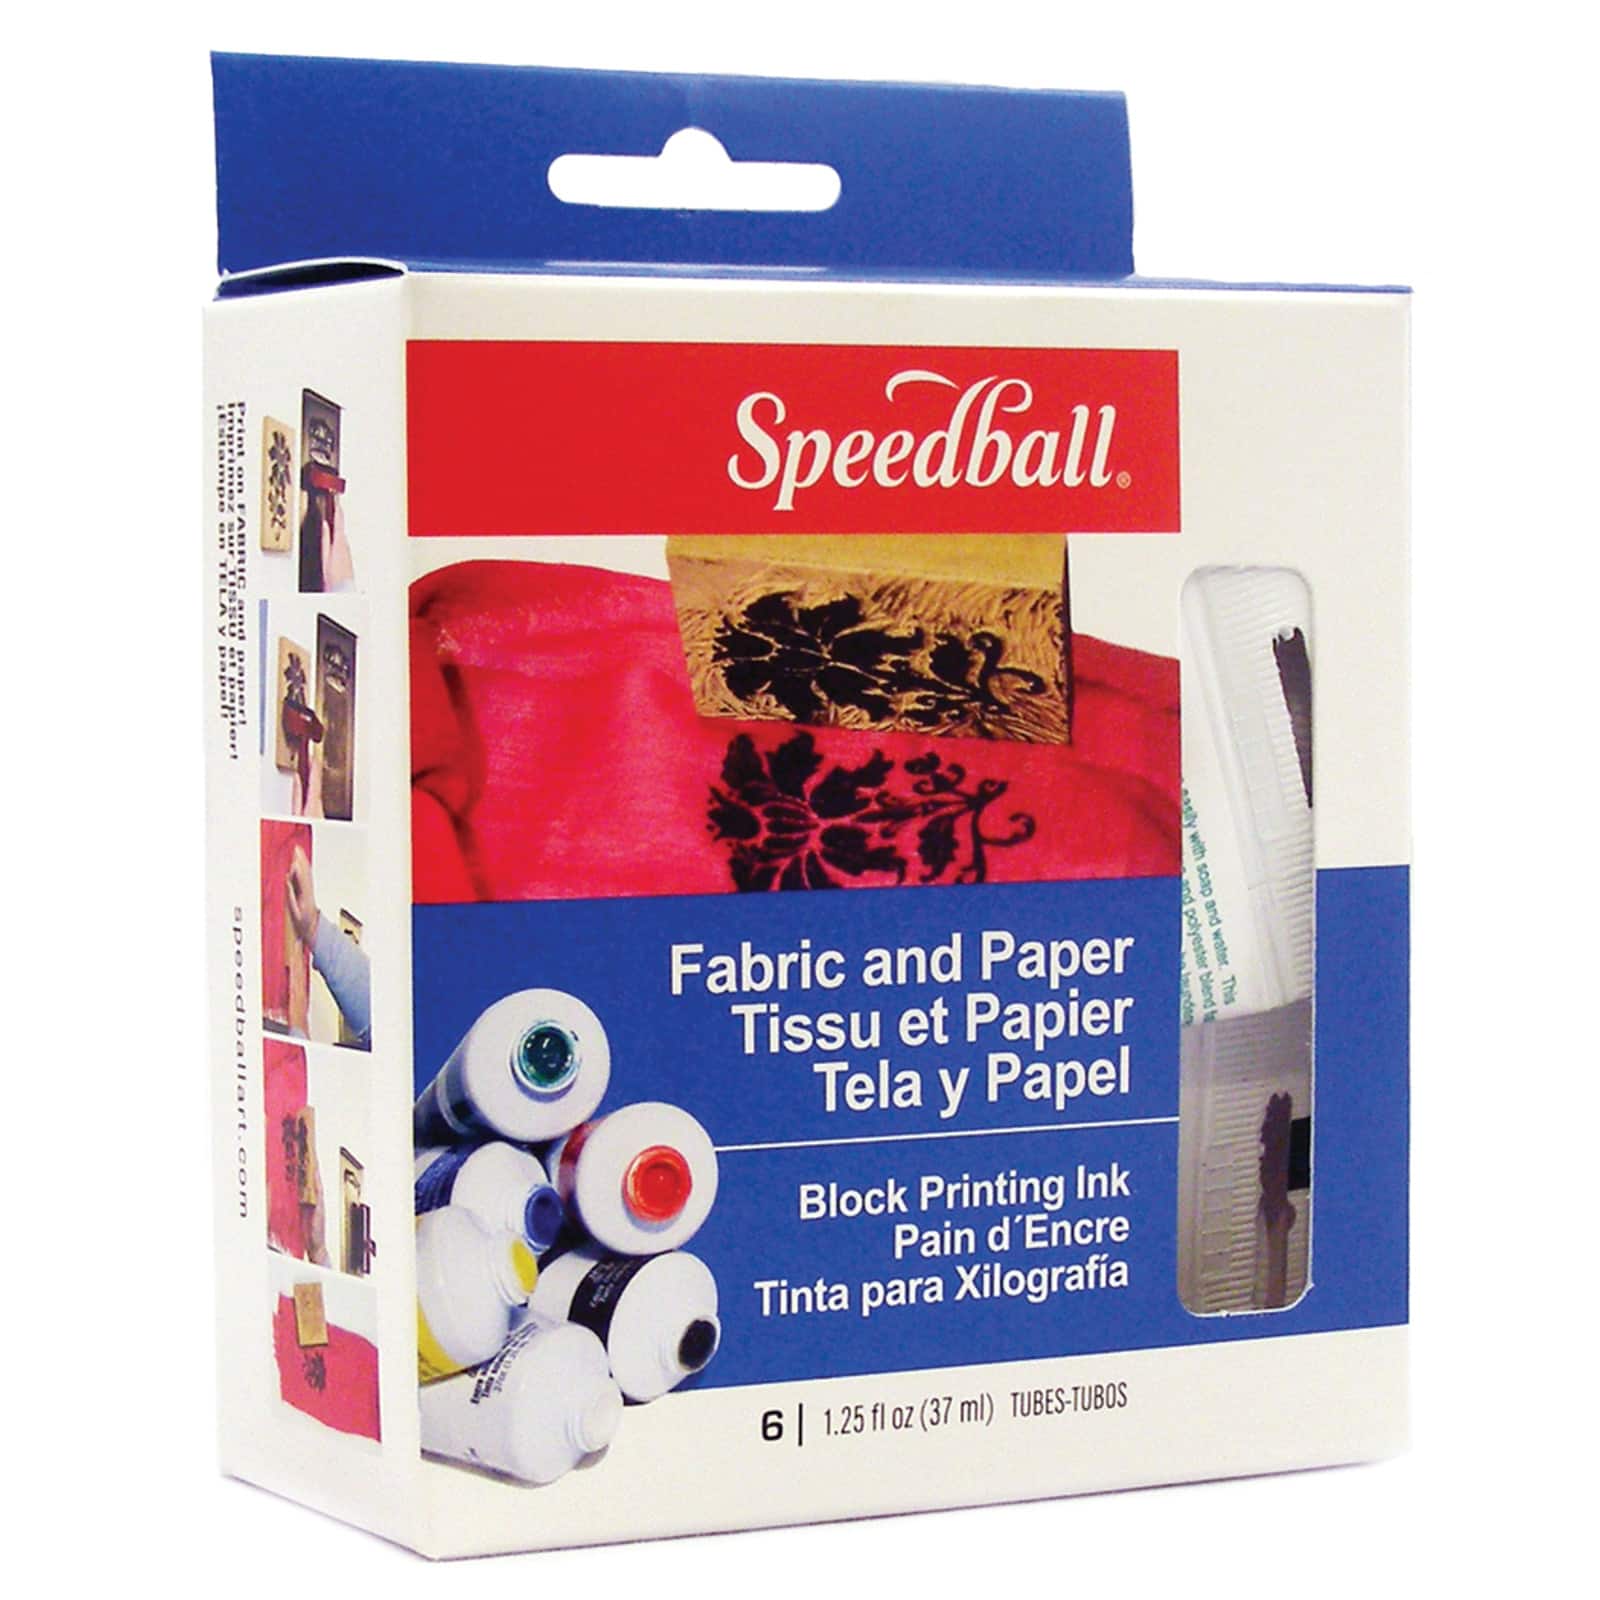 Speedball Block Water Soluble Printing Ink - All colors • PAPER